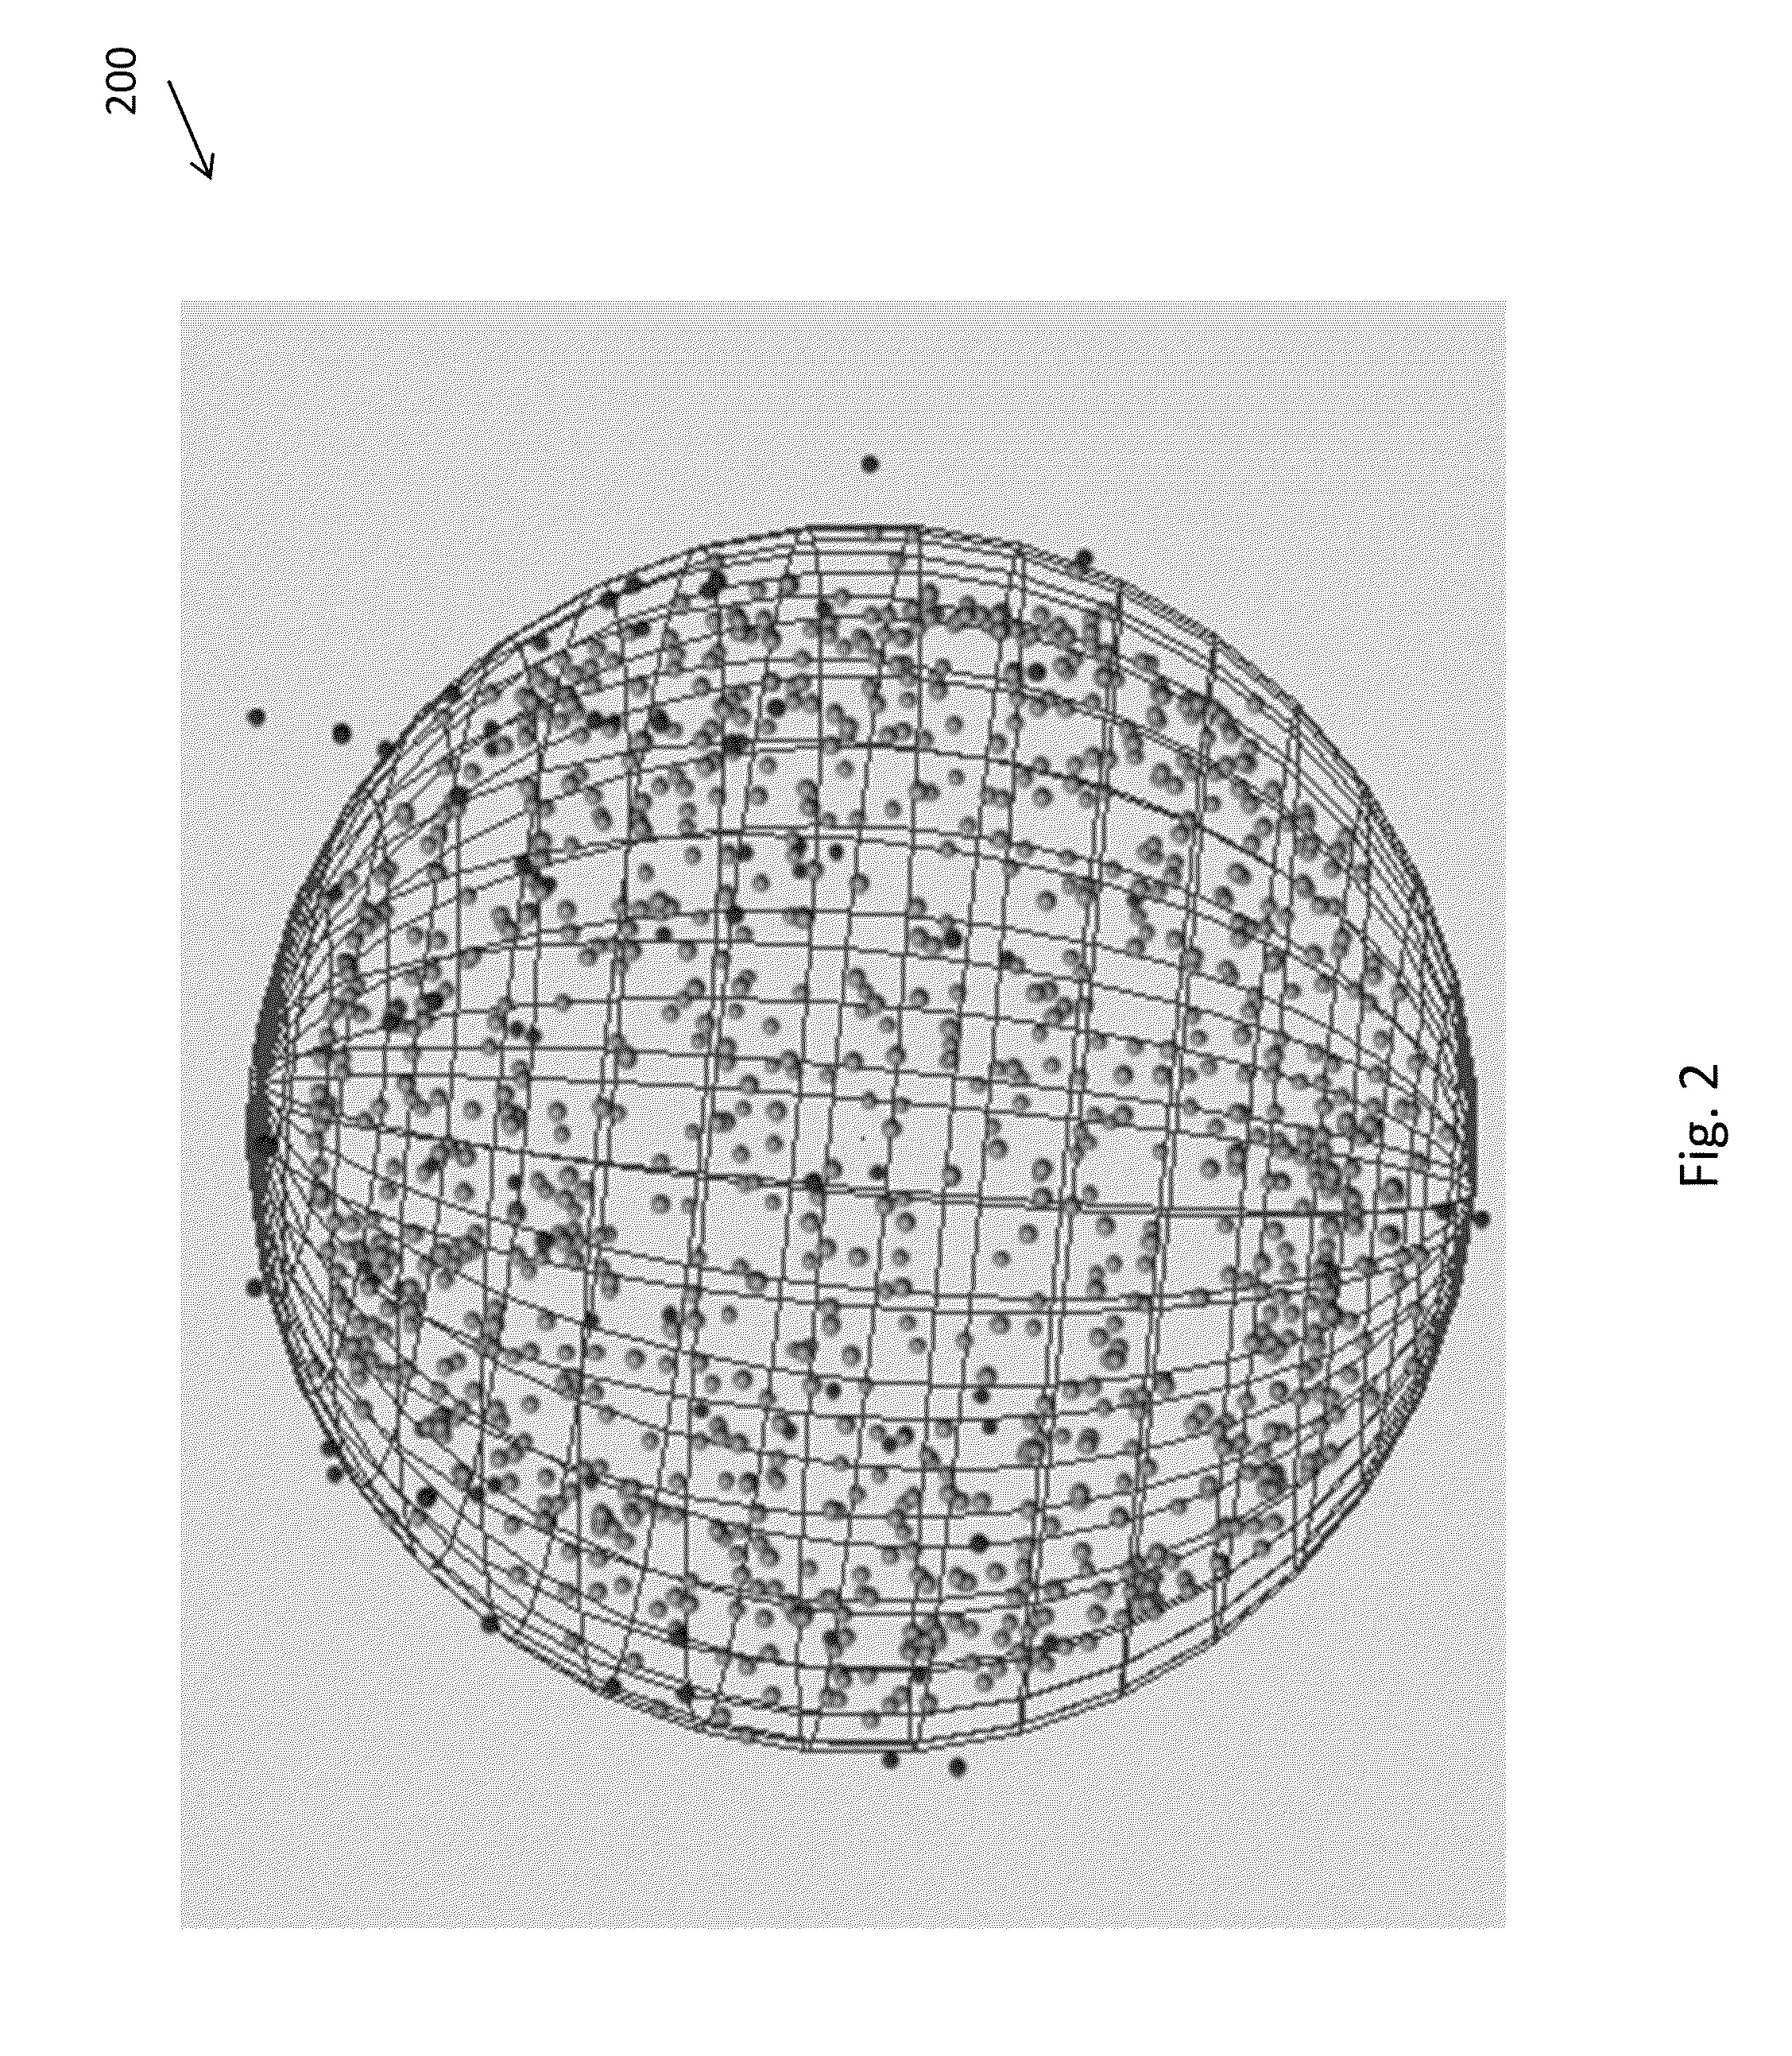 System and method for interactive visual analytics of multi-dimensional temporal data